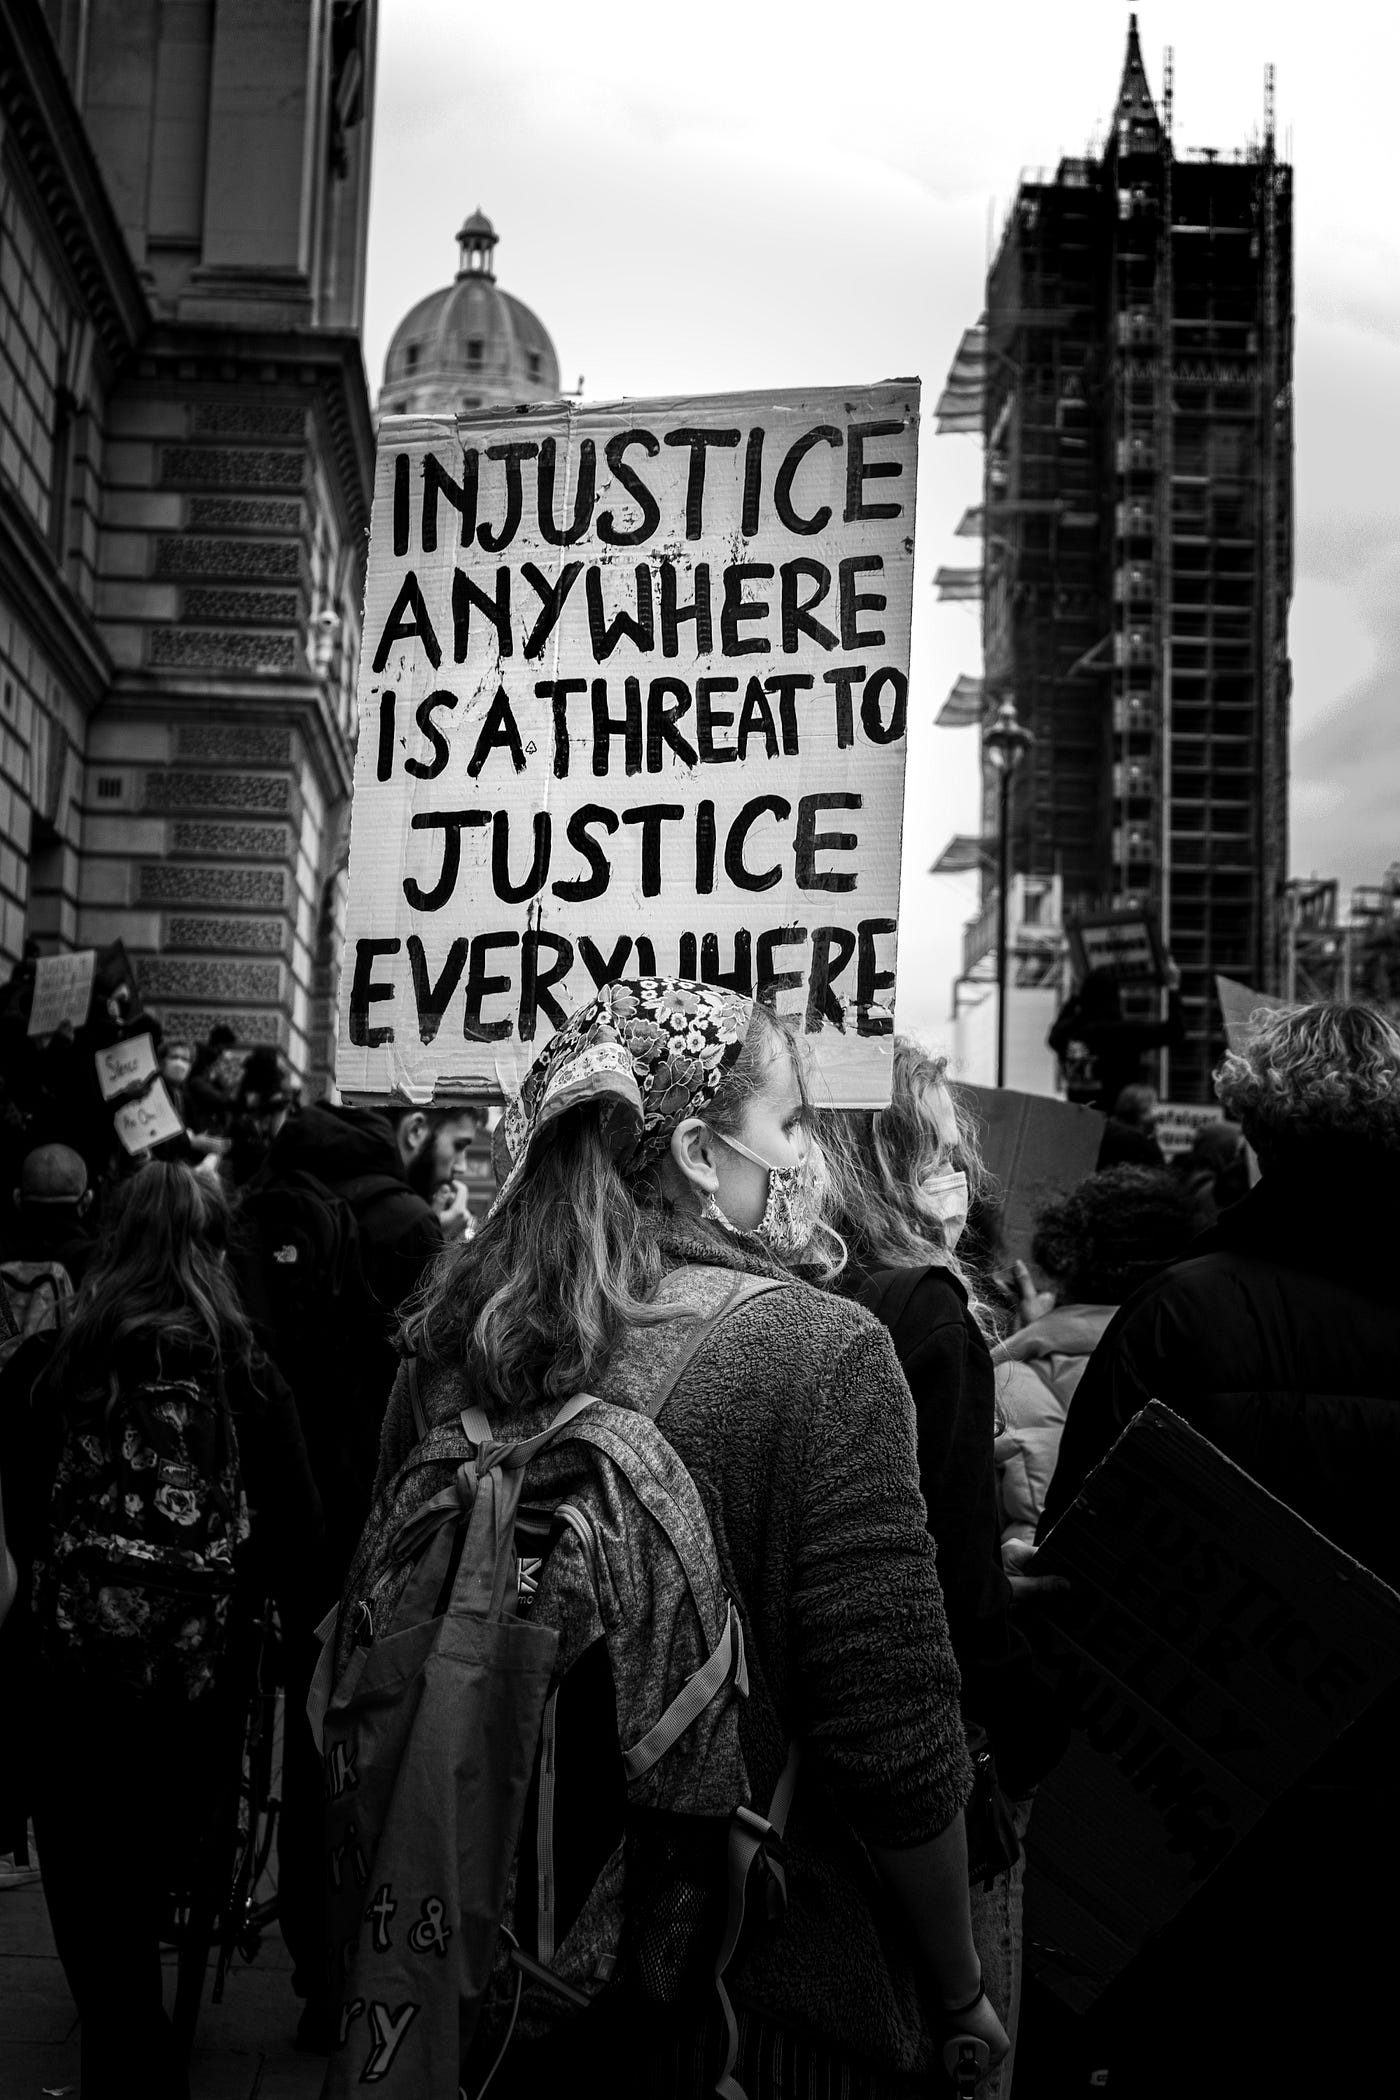 Will I Stand Up Against Injustice?, by Jennifer K